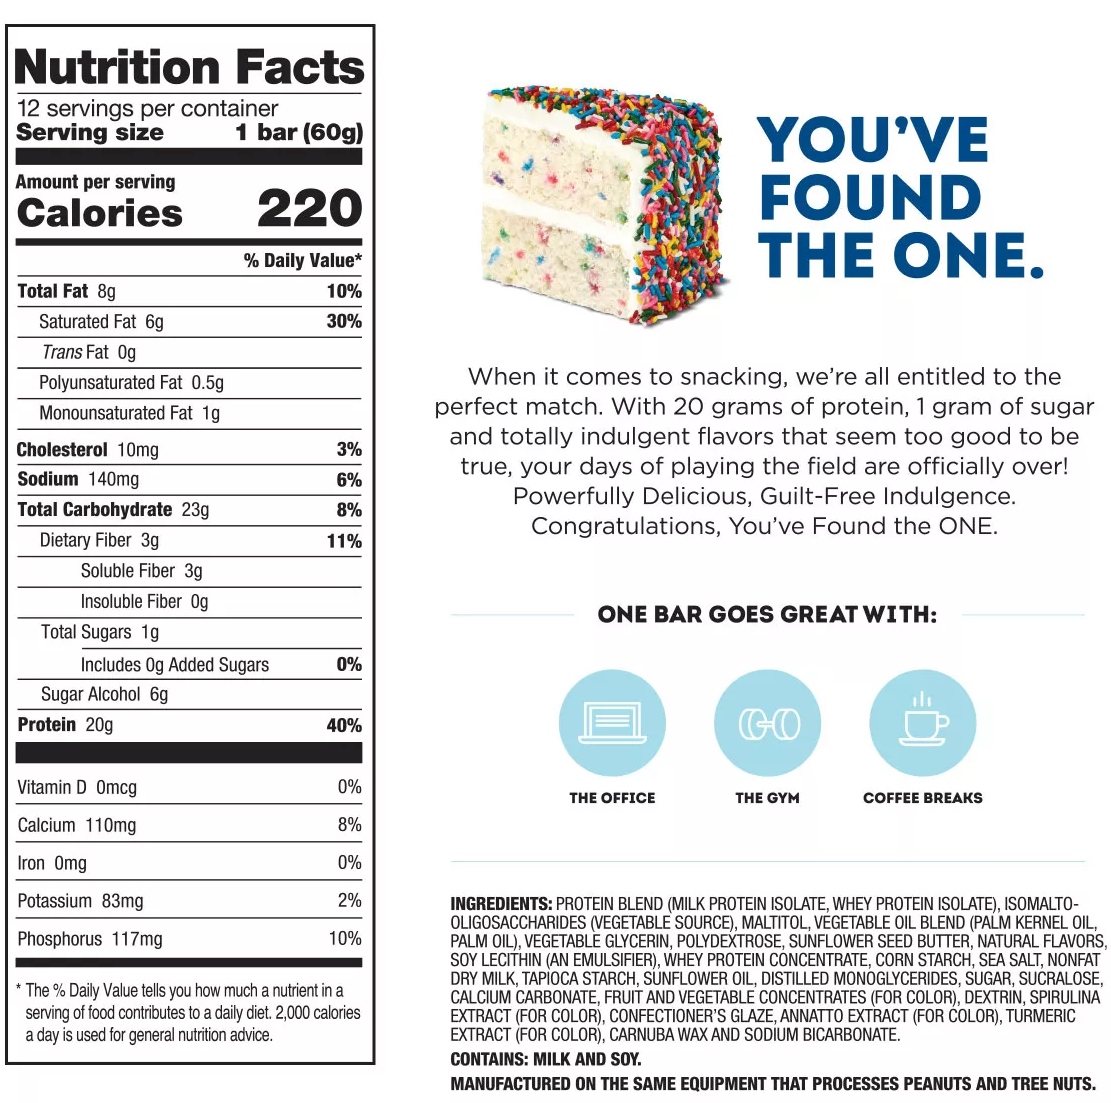 Nutrition facts for a protein bar with 20g protein, 23g carbohydrates, 8g fats, beneficial vitamins & minerals. Contains milk, soy, vegetable oil, natural flavors.